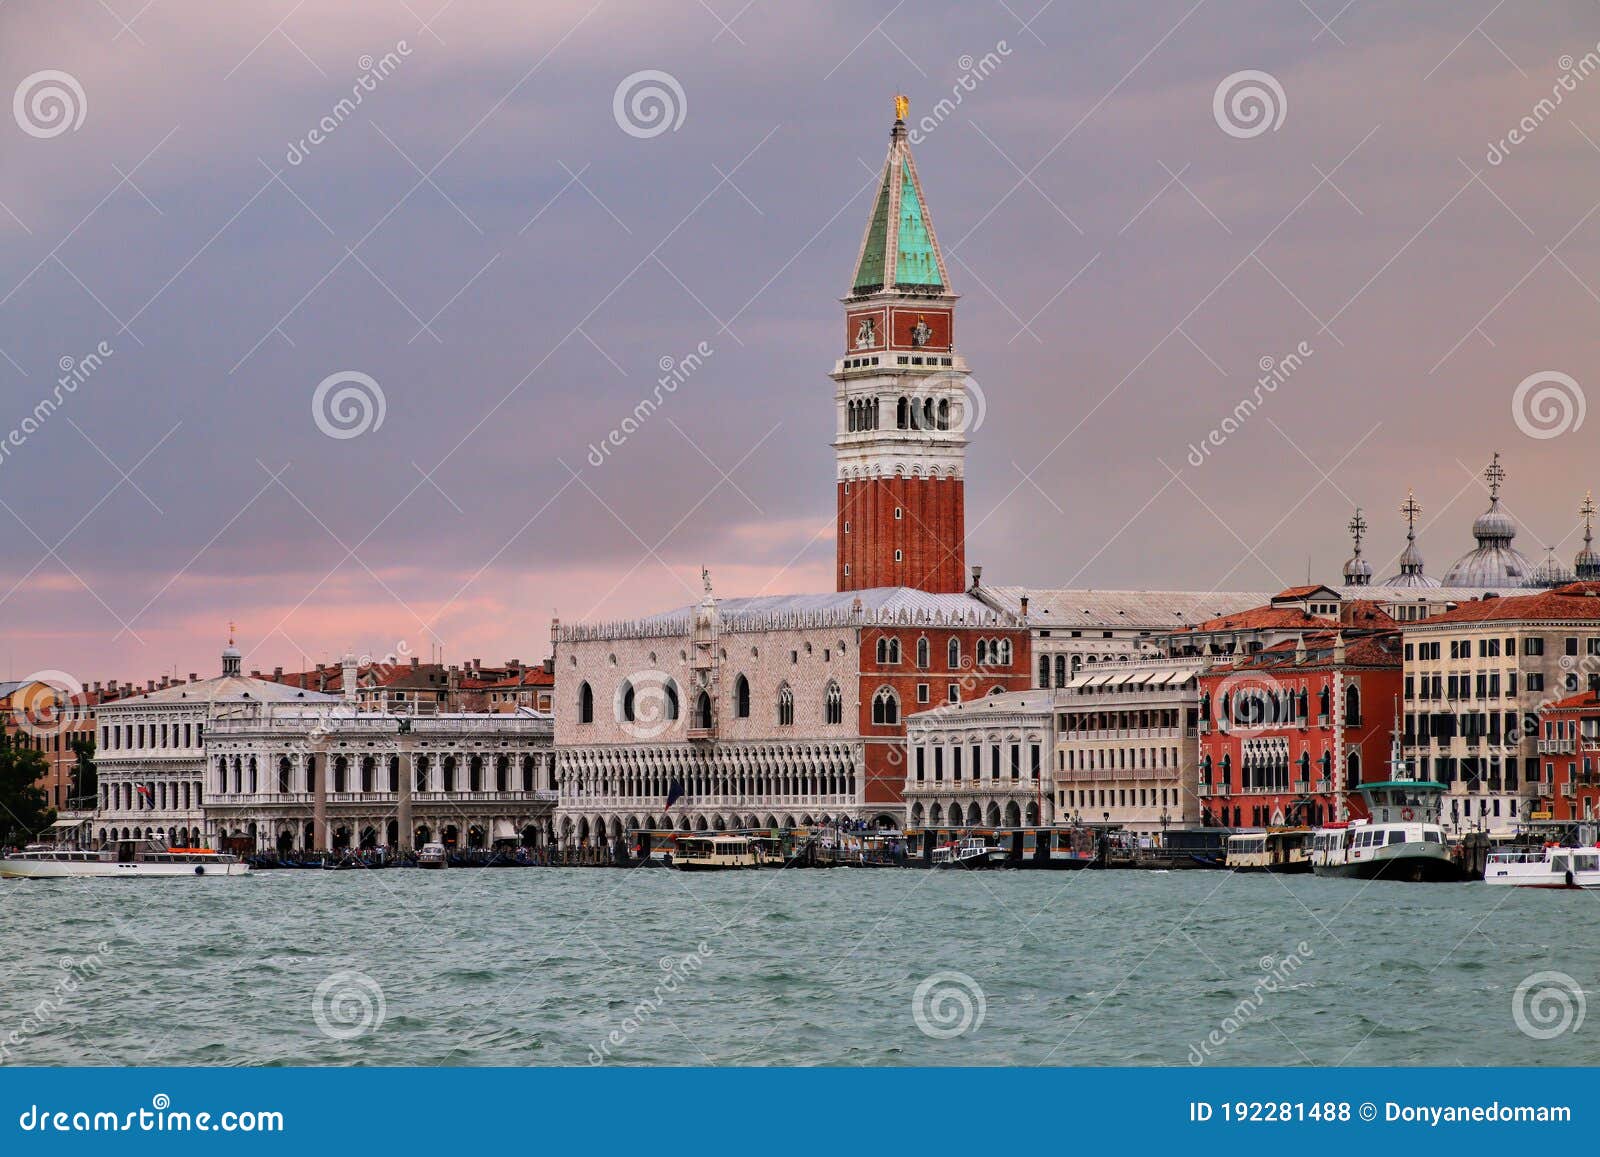 view of san marco campanile, palazzo ducale and biblioteca at sunset in venice, italy